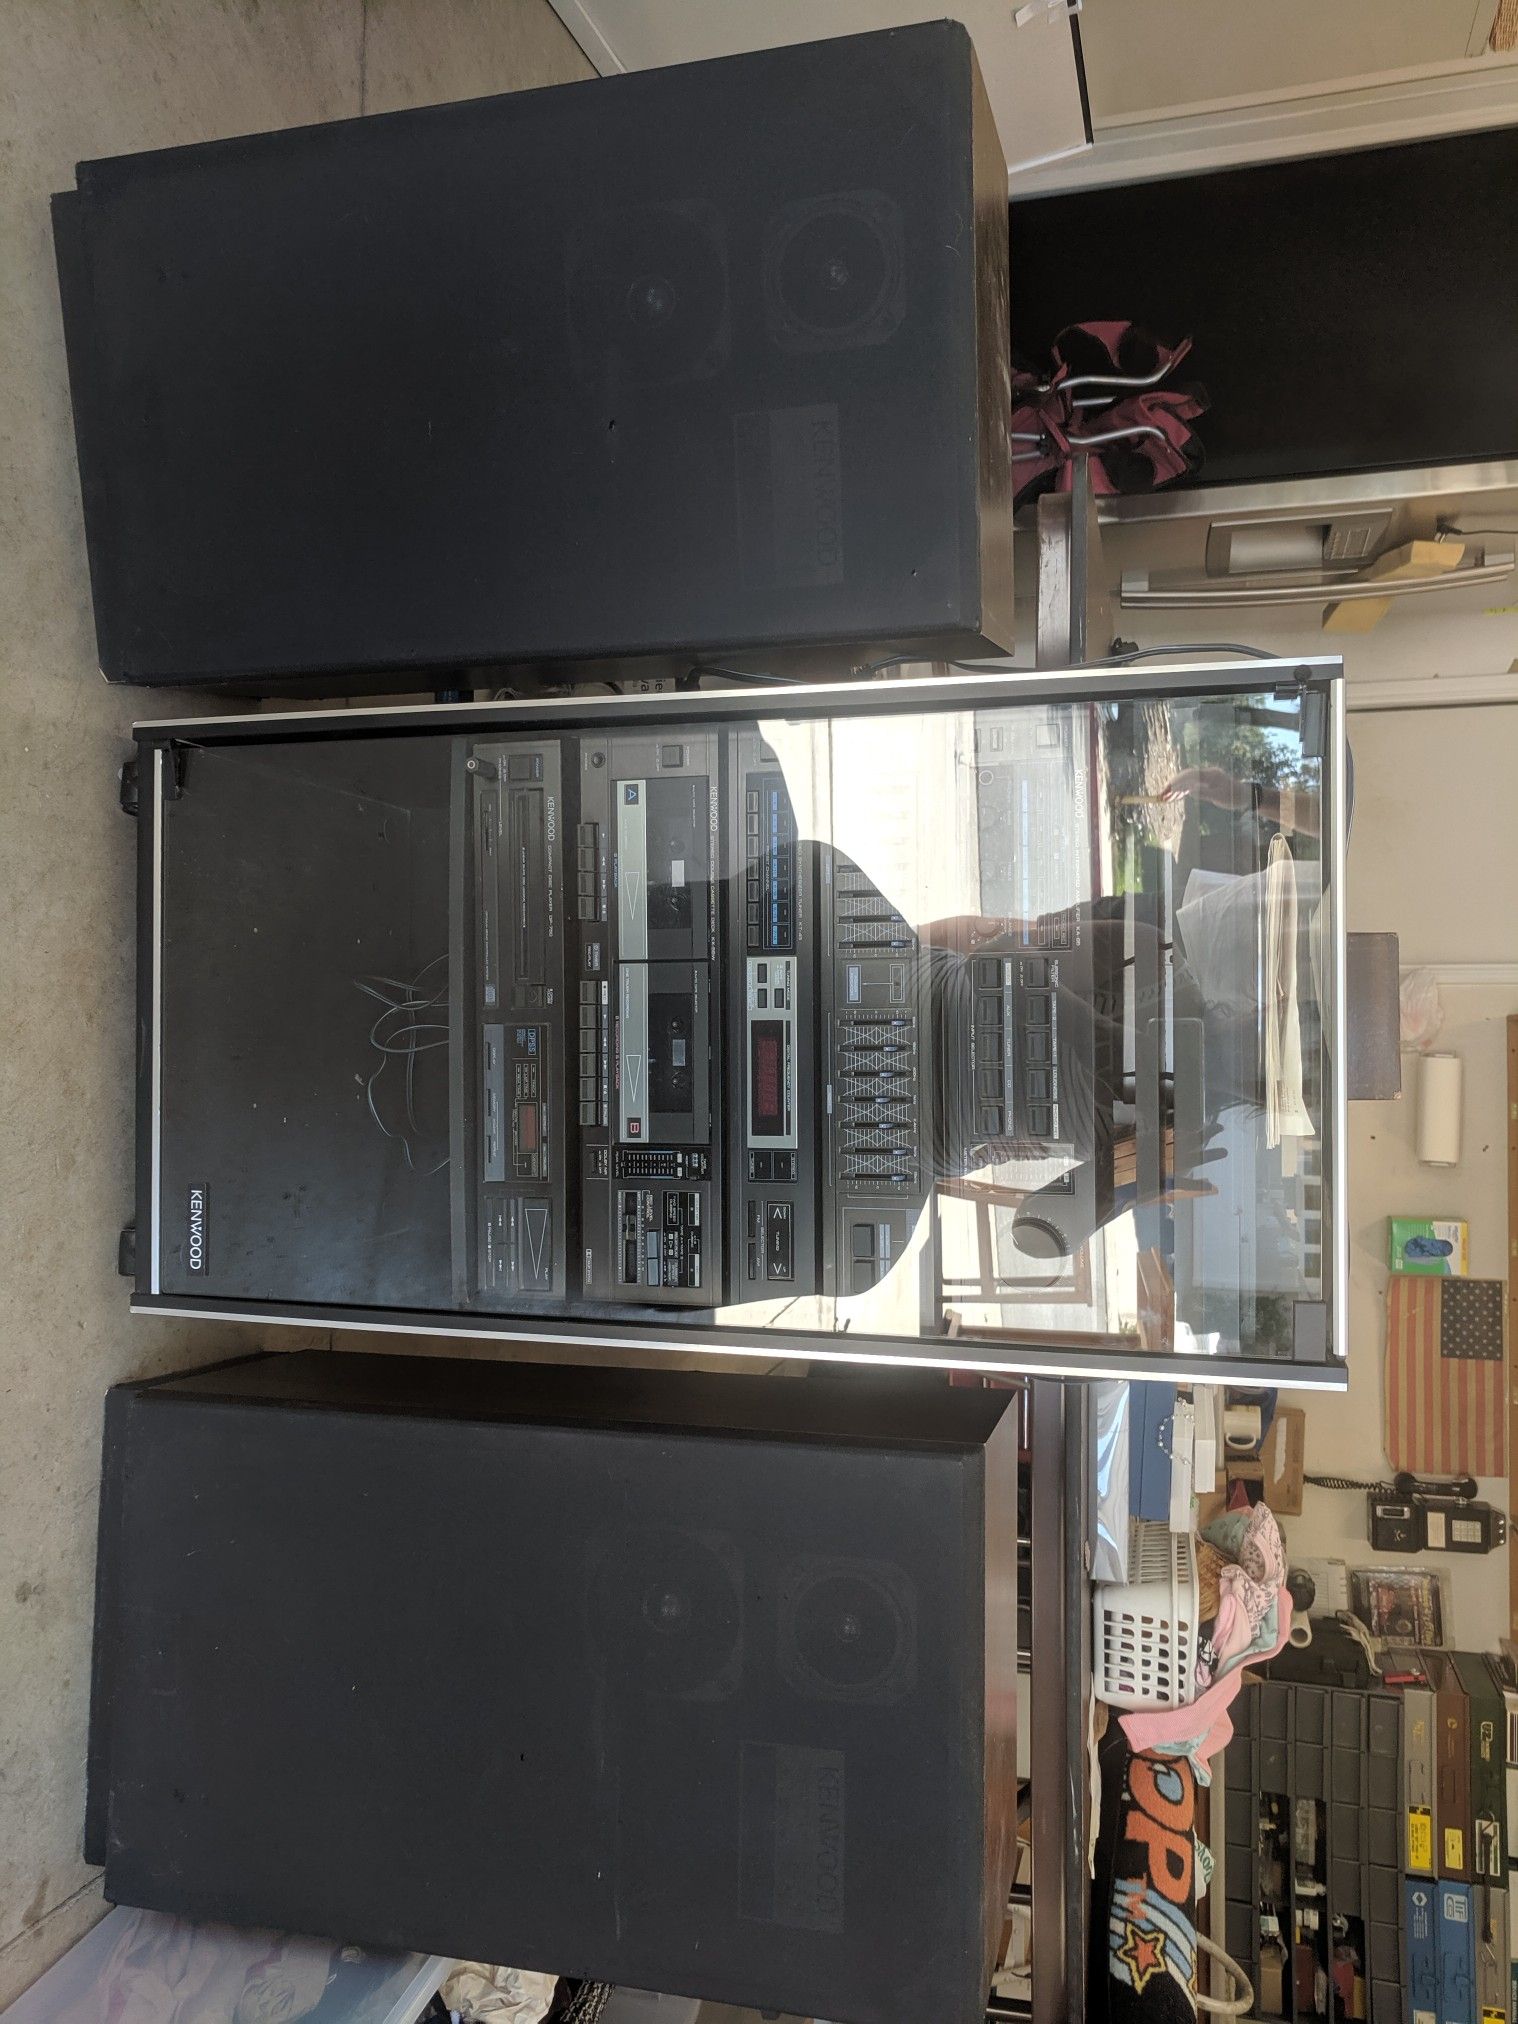 1989 Kenwood 6 component stereo system in cabinet with speakers